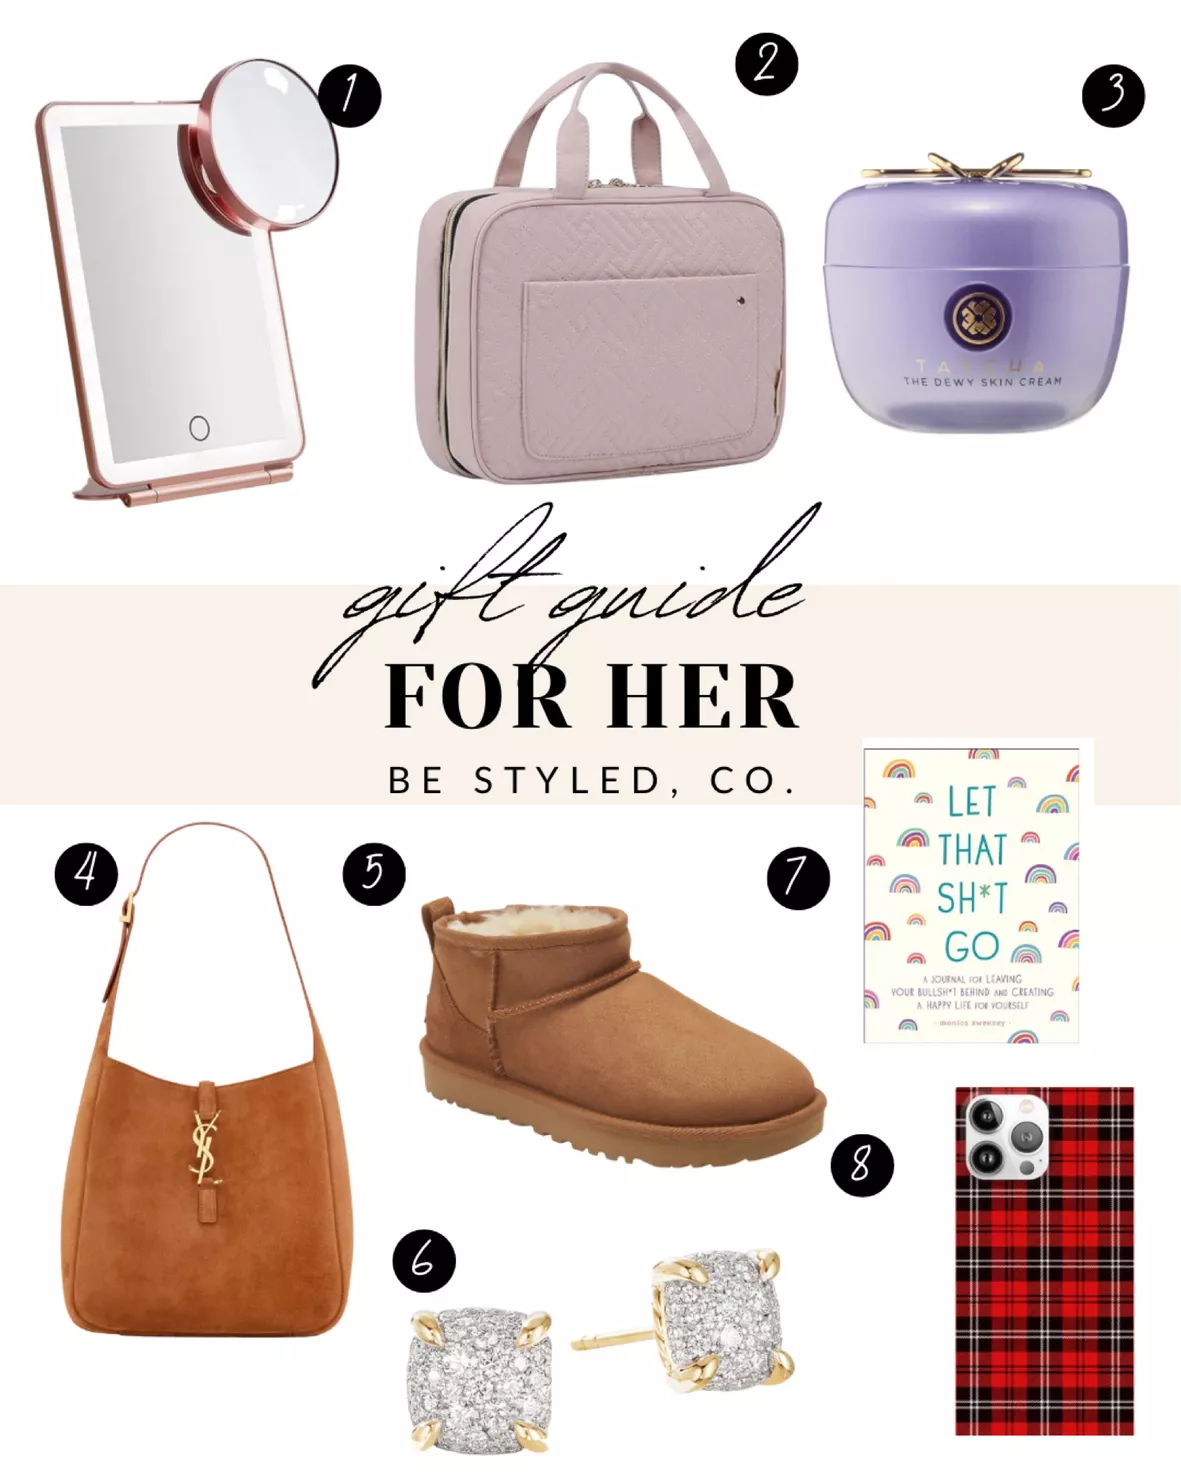 Best Christmas Gifts for Women 2019